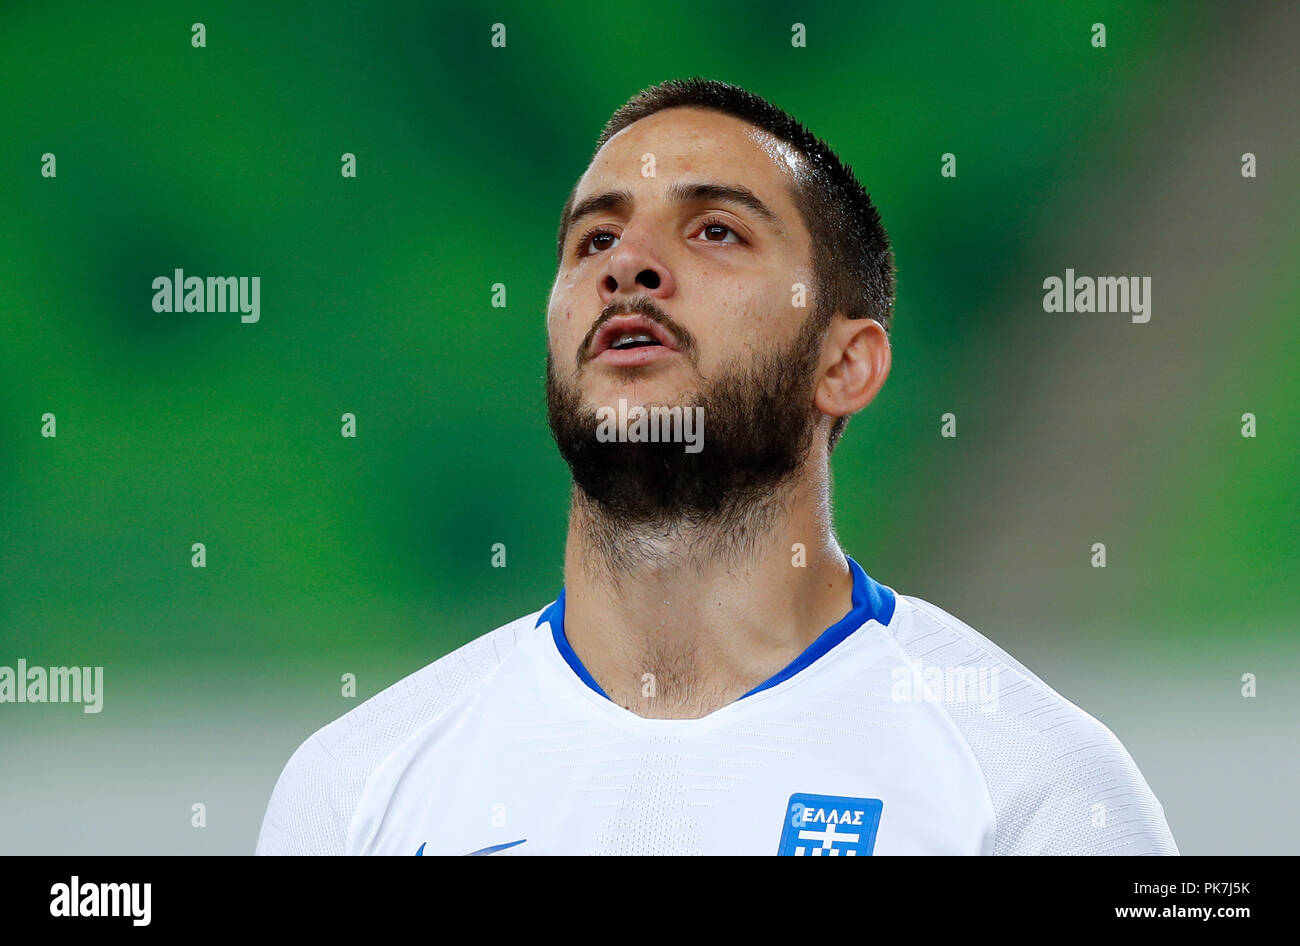 BUDAPEST, HUNGARY - SEPTEMBER 11: Kostas Manolas of Greece sings the anthem prior to the UEFA Nations League group stage match between Hungary and Greece at Groupama Arena on September 11, 2018 in Budapest, Hungary. Credit: Laszlo Szirtesi/Alamy Live News Stock Photo